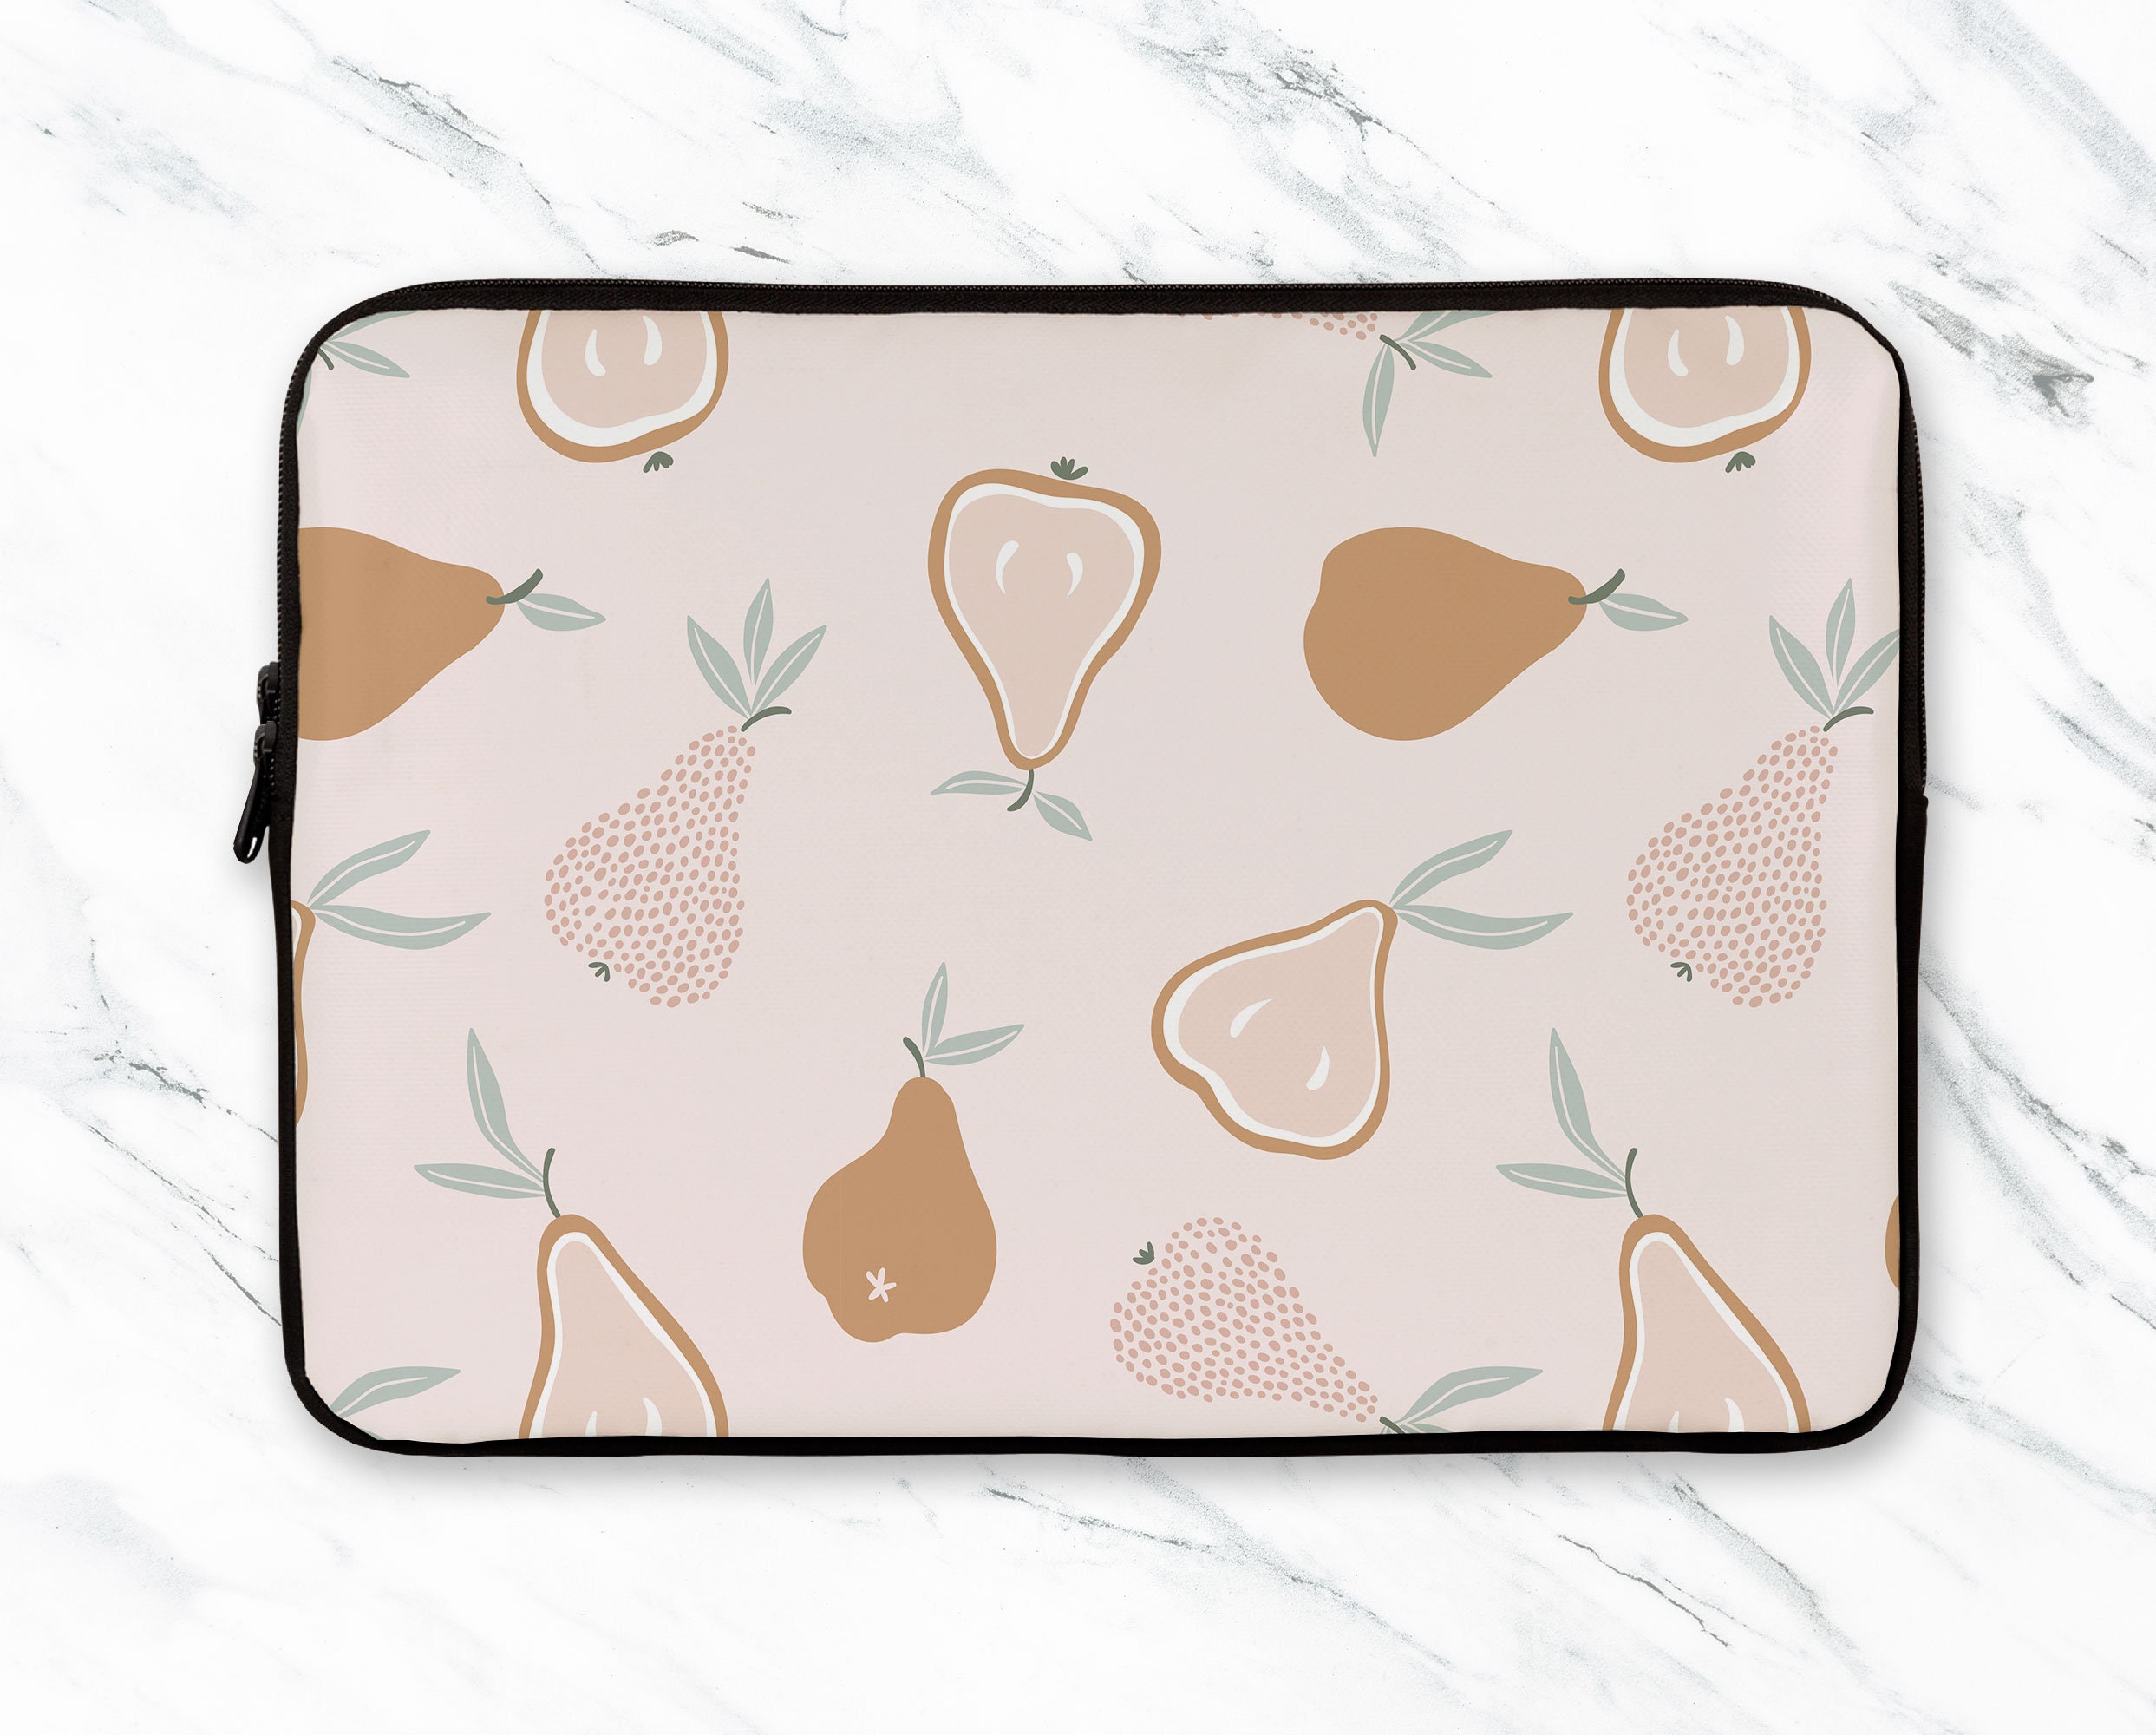 Vormen Billy toxiciteit Pear Laptop Sleeve Fruits Laptop Sleeve Abstractions Laptop - Etsy